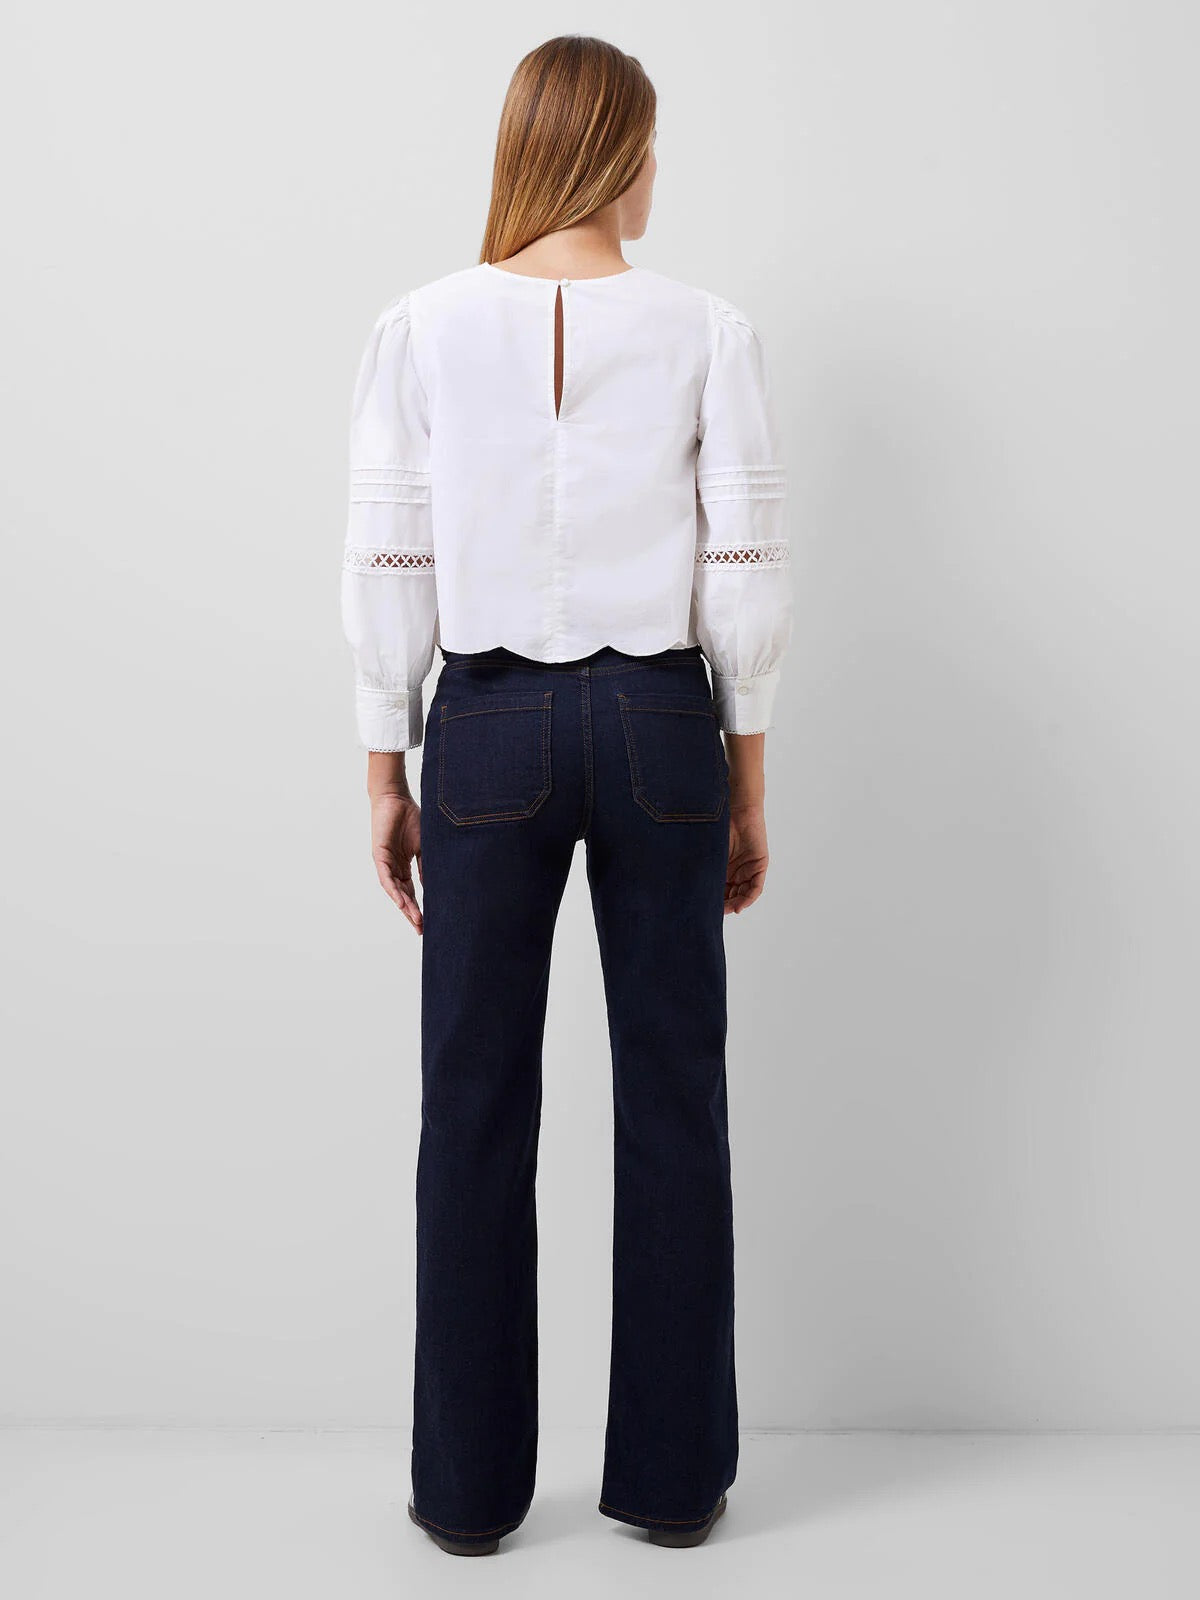 French Connection Alissa Embroidered Poplin Blouse - LINEN WHITE